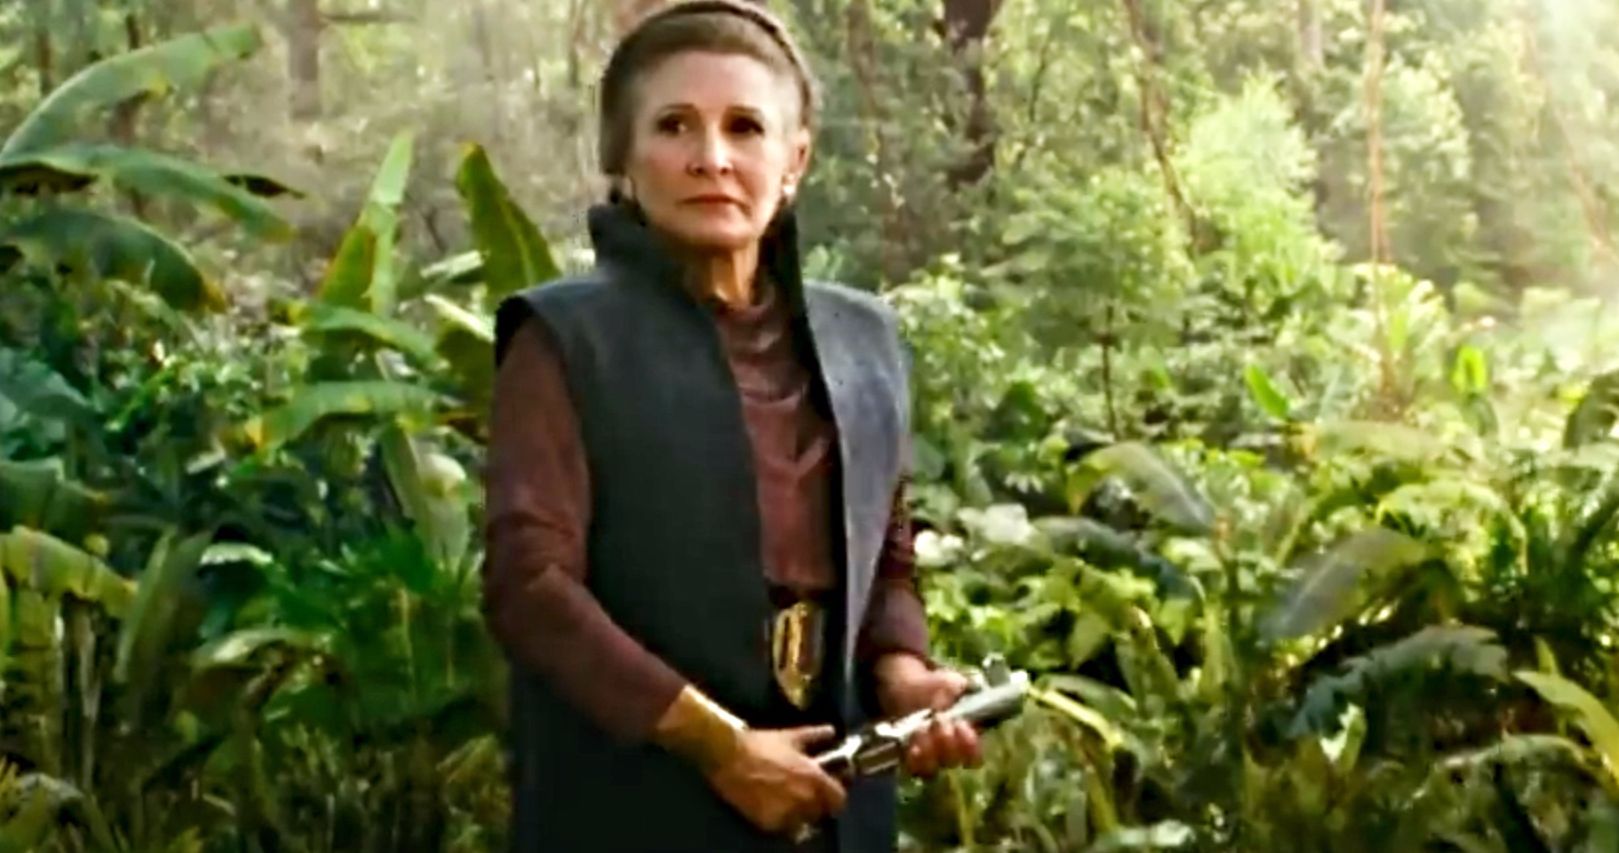 Leia Has a Lightsaber in Latest Star Wars 9 TV Spot